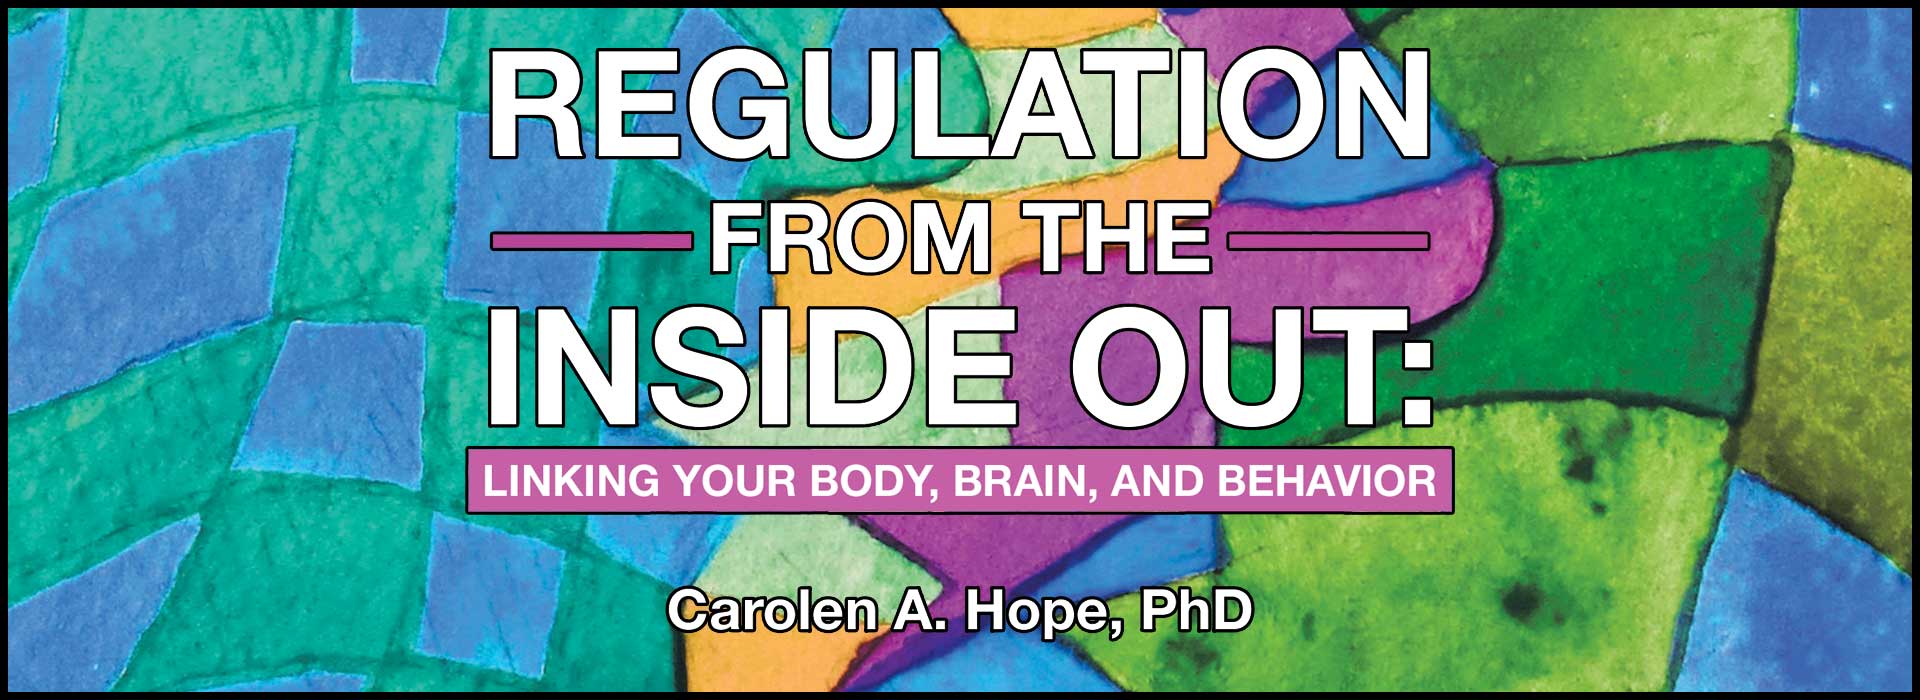 Regulation from the Inside Out/Carolen A. Hope, PhD